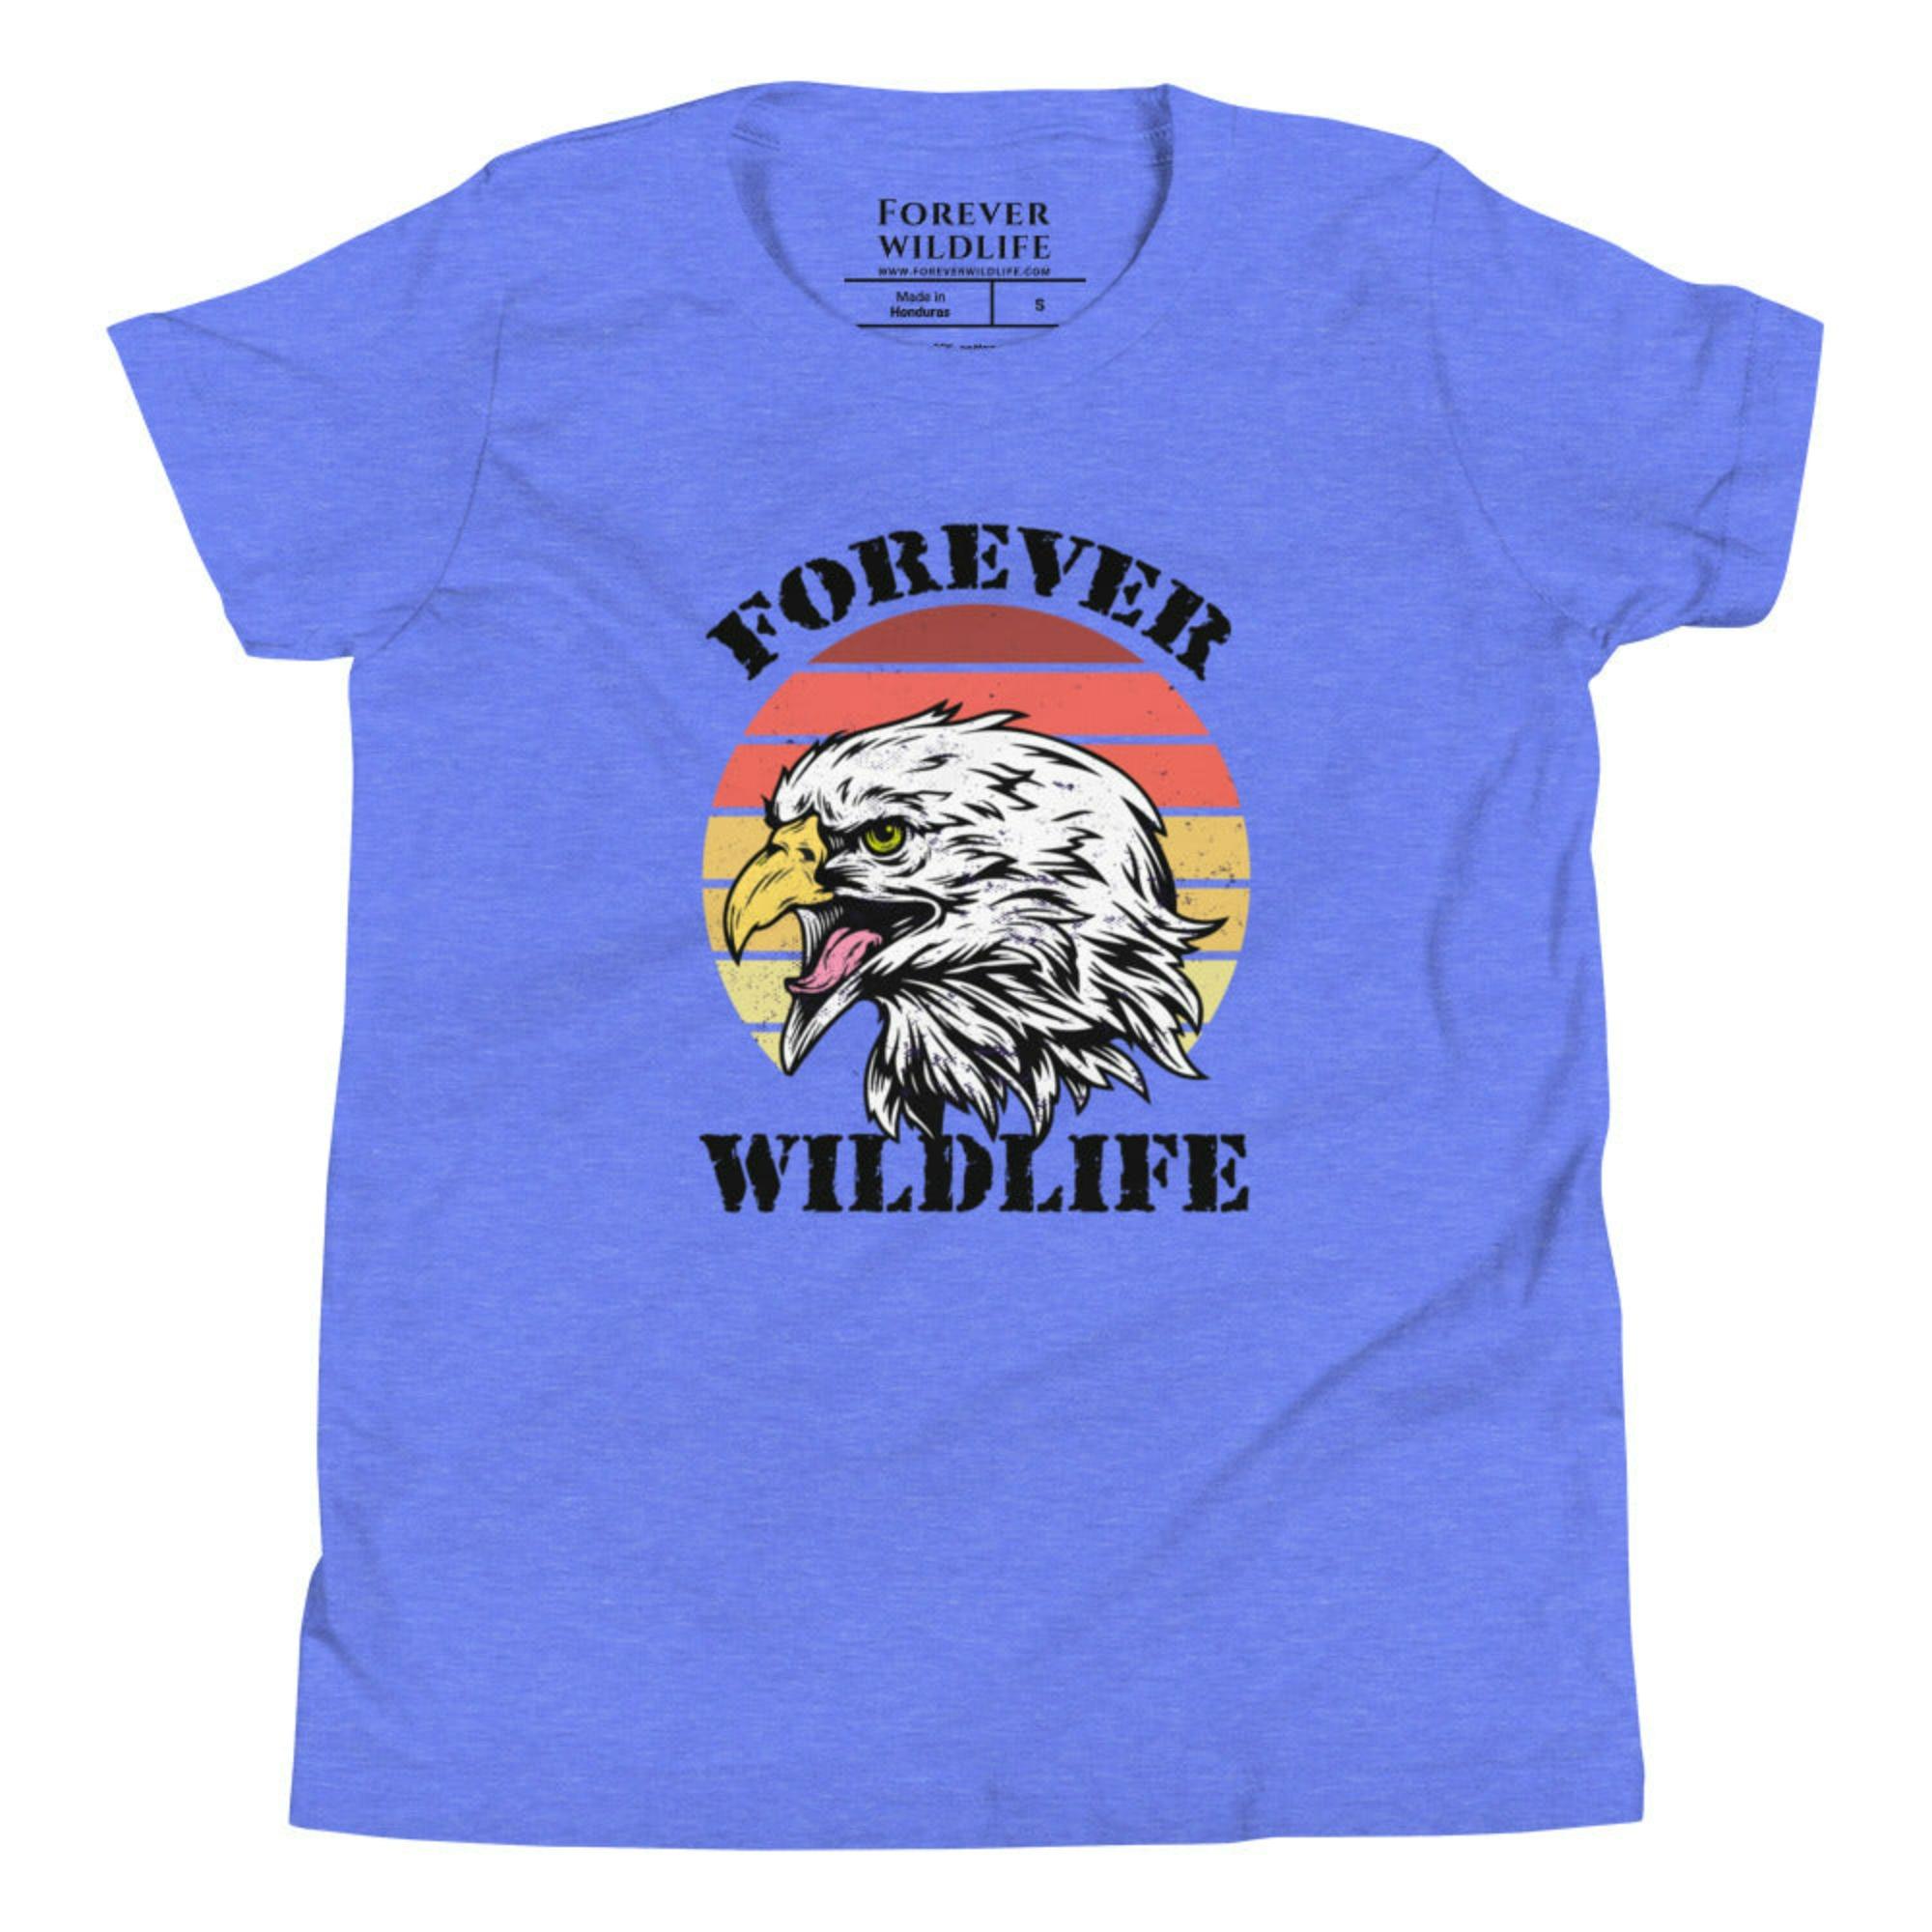 Heather Blue Tee, Youth T-Shirt with Eagle graphic as part of Wildlife T Shirts, Wildlife Clothing & Apparel by Forever Wildlife